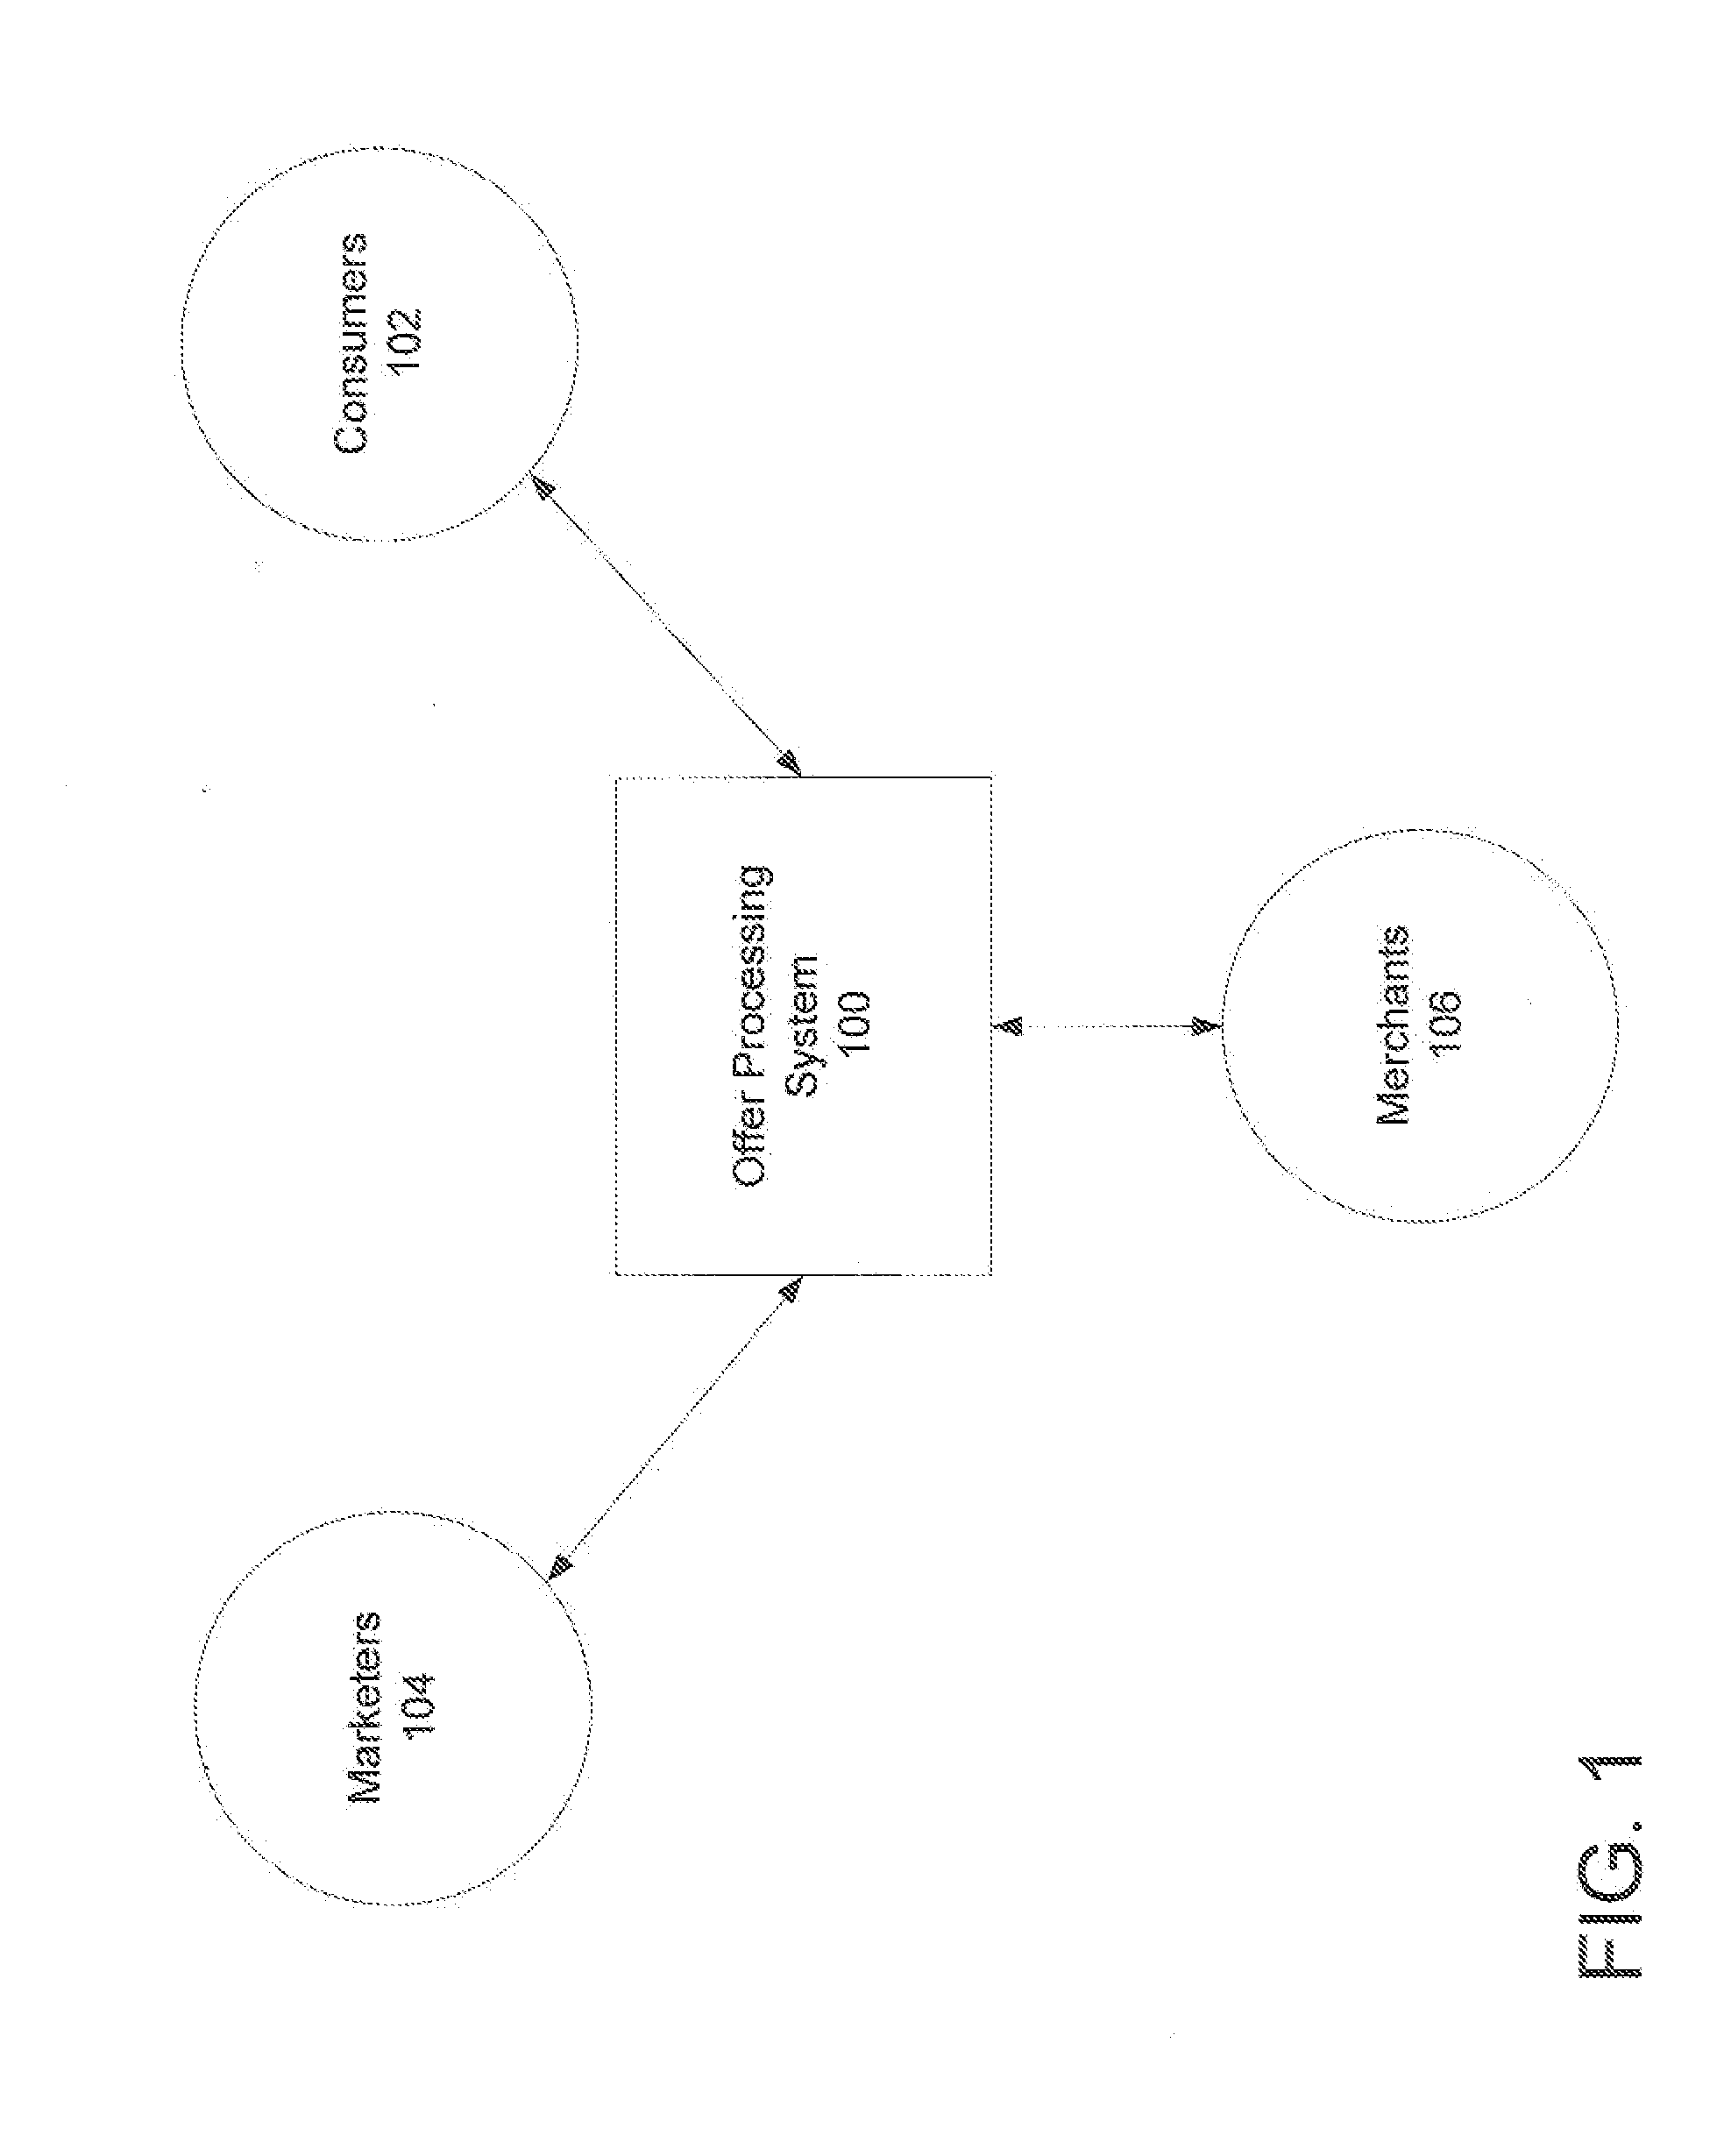 System and Method for Managing Promotional Offers Using a Communications Platform